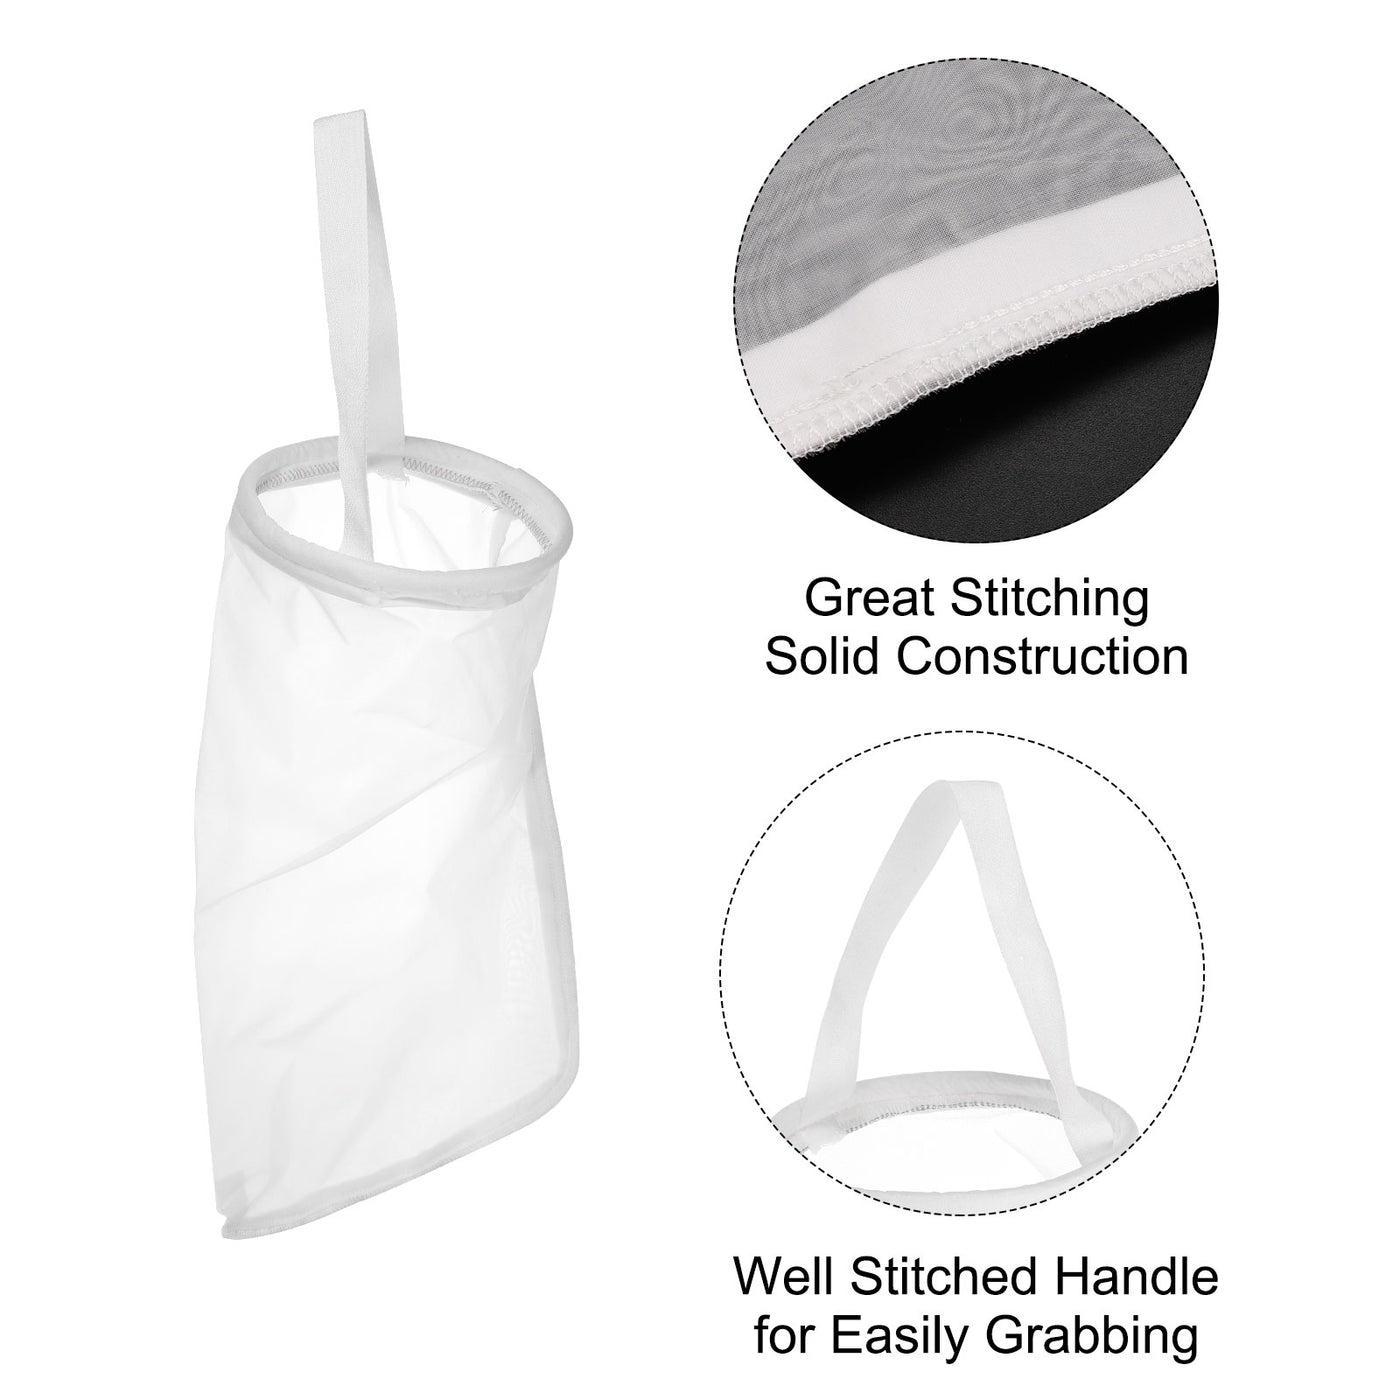 uxcell Uxcell Paint Filter Bag 80 Mesh (16.9"x7") Nylon Strainer for Filtering Paint